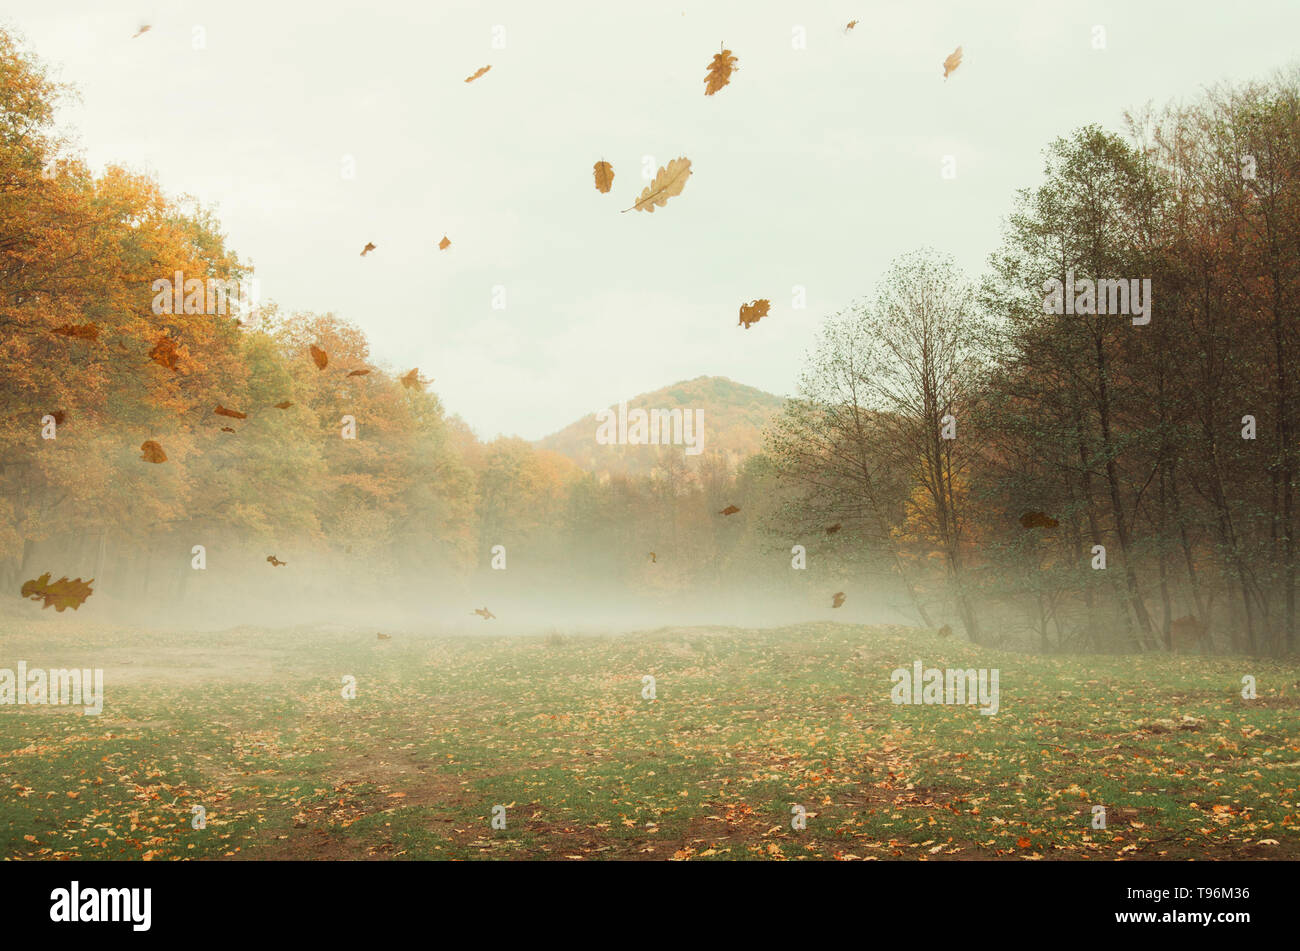 autumn landscape with falling leaves blowin in the wind Stock Photo